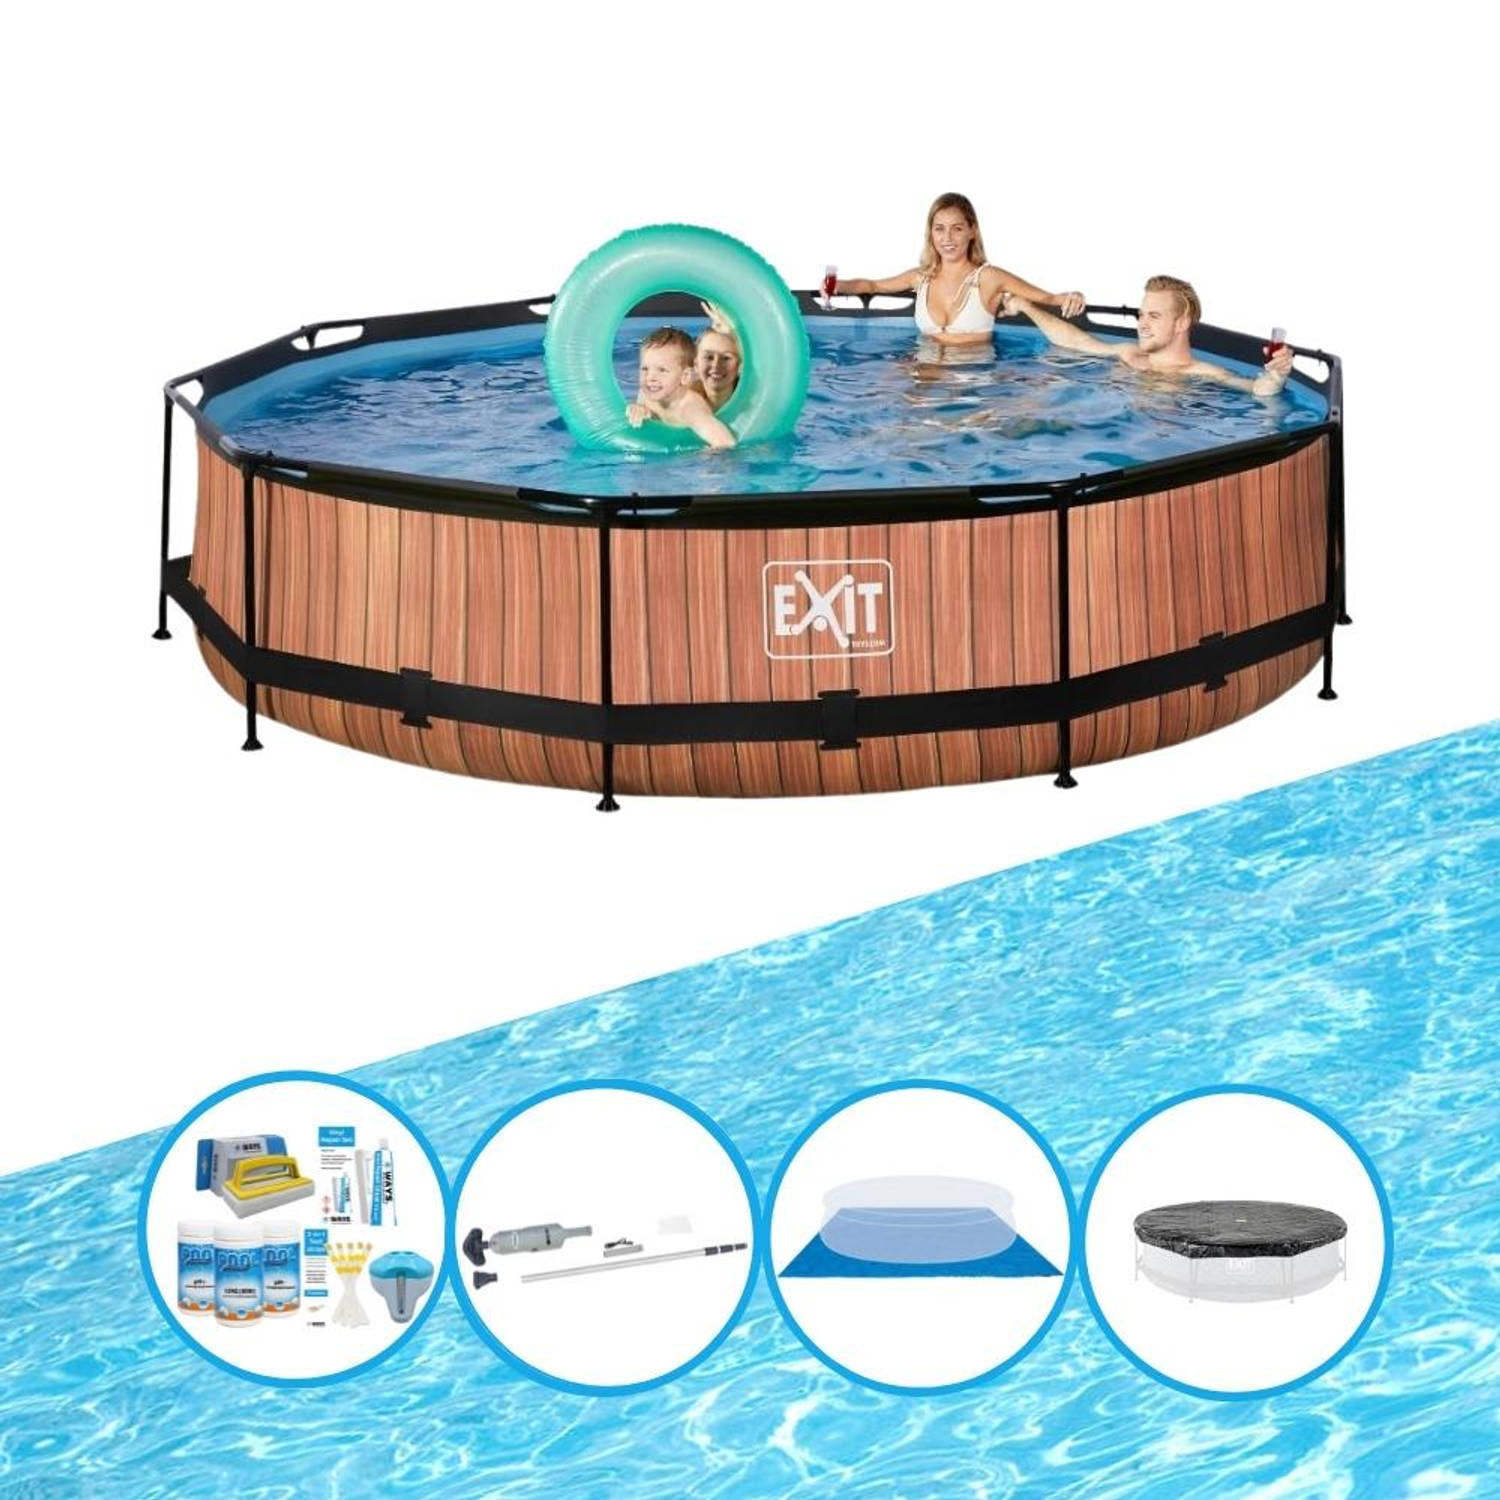 EXIT Zwembad Timber Style - Frame Pool ø360x76cm - Complete zwembadset